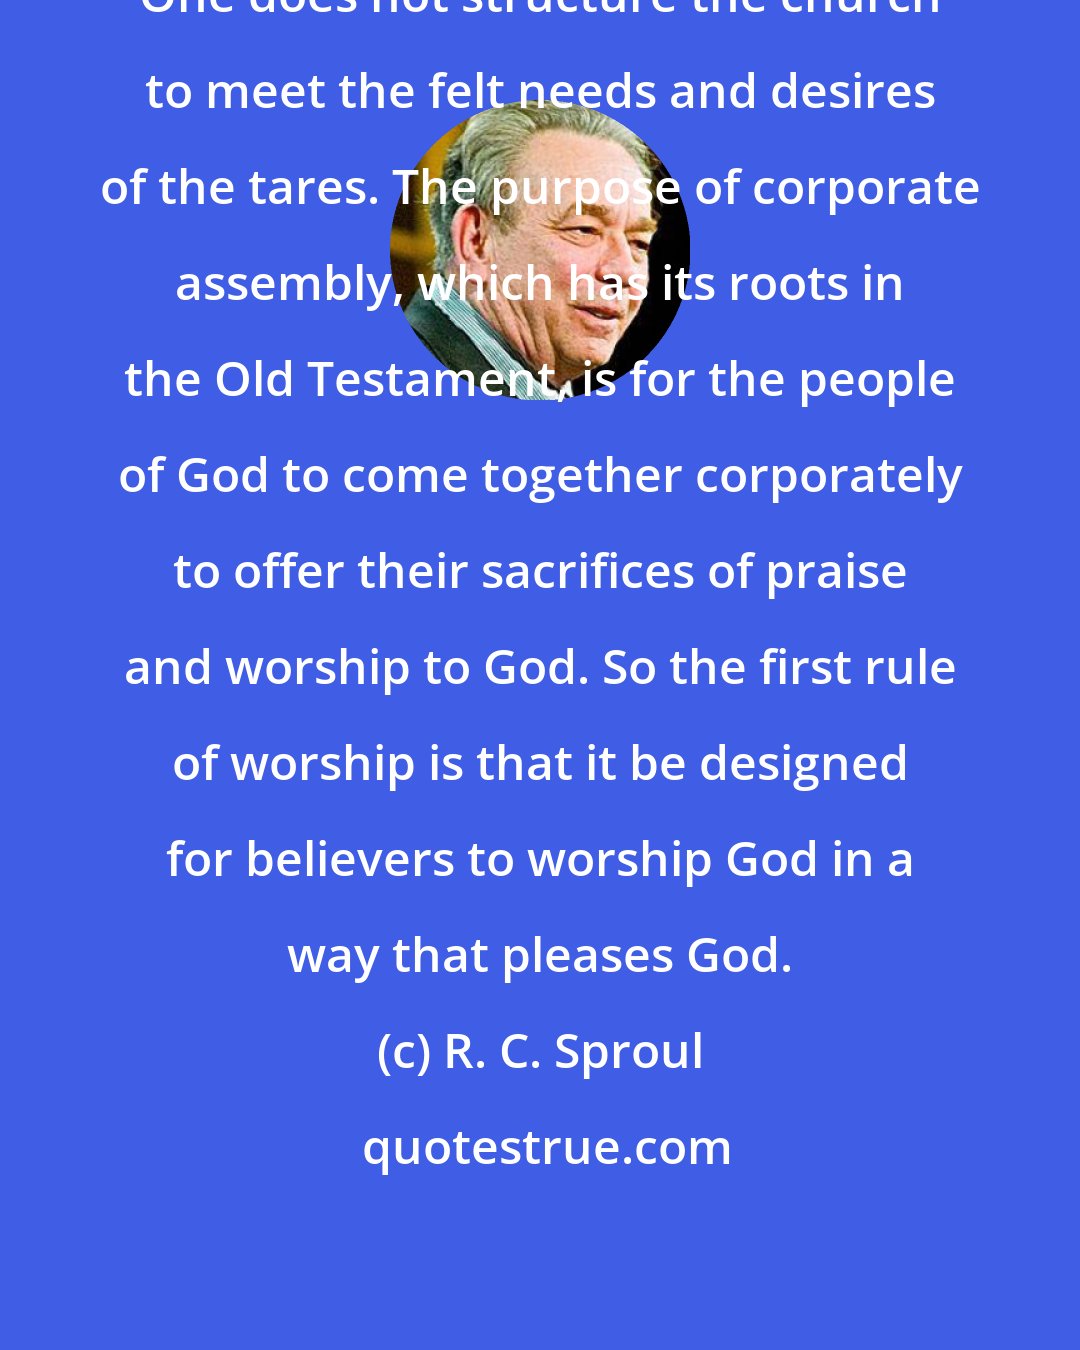 R. C. Sproul: One does not structure the church to meet the felt needs and desires of the tares. The purpose of corporate assembly, which has its roots in the Old Testament, is for the people of God to come together corporately to offer their sacrifices of praise and worship to God. So the first rule of worship is that it be designed for believers to worship God in a way that pleases God.